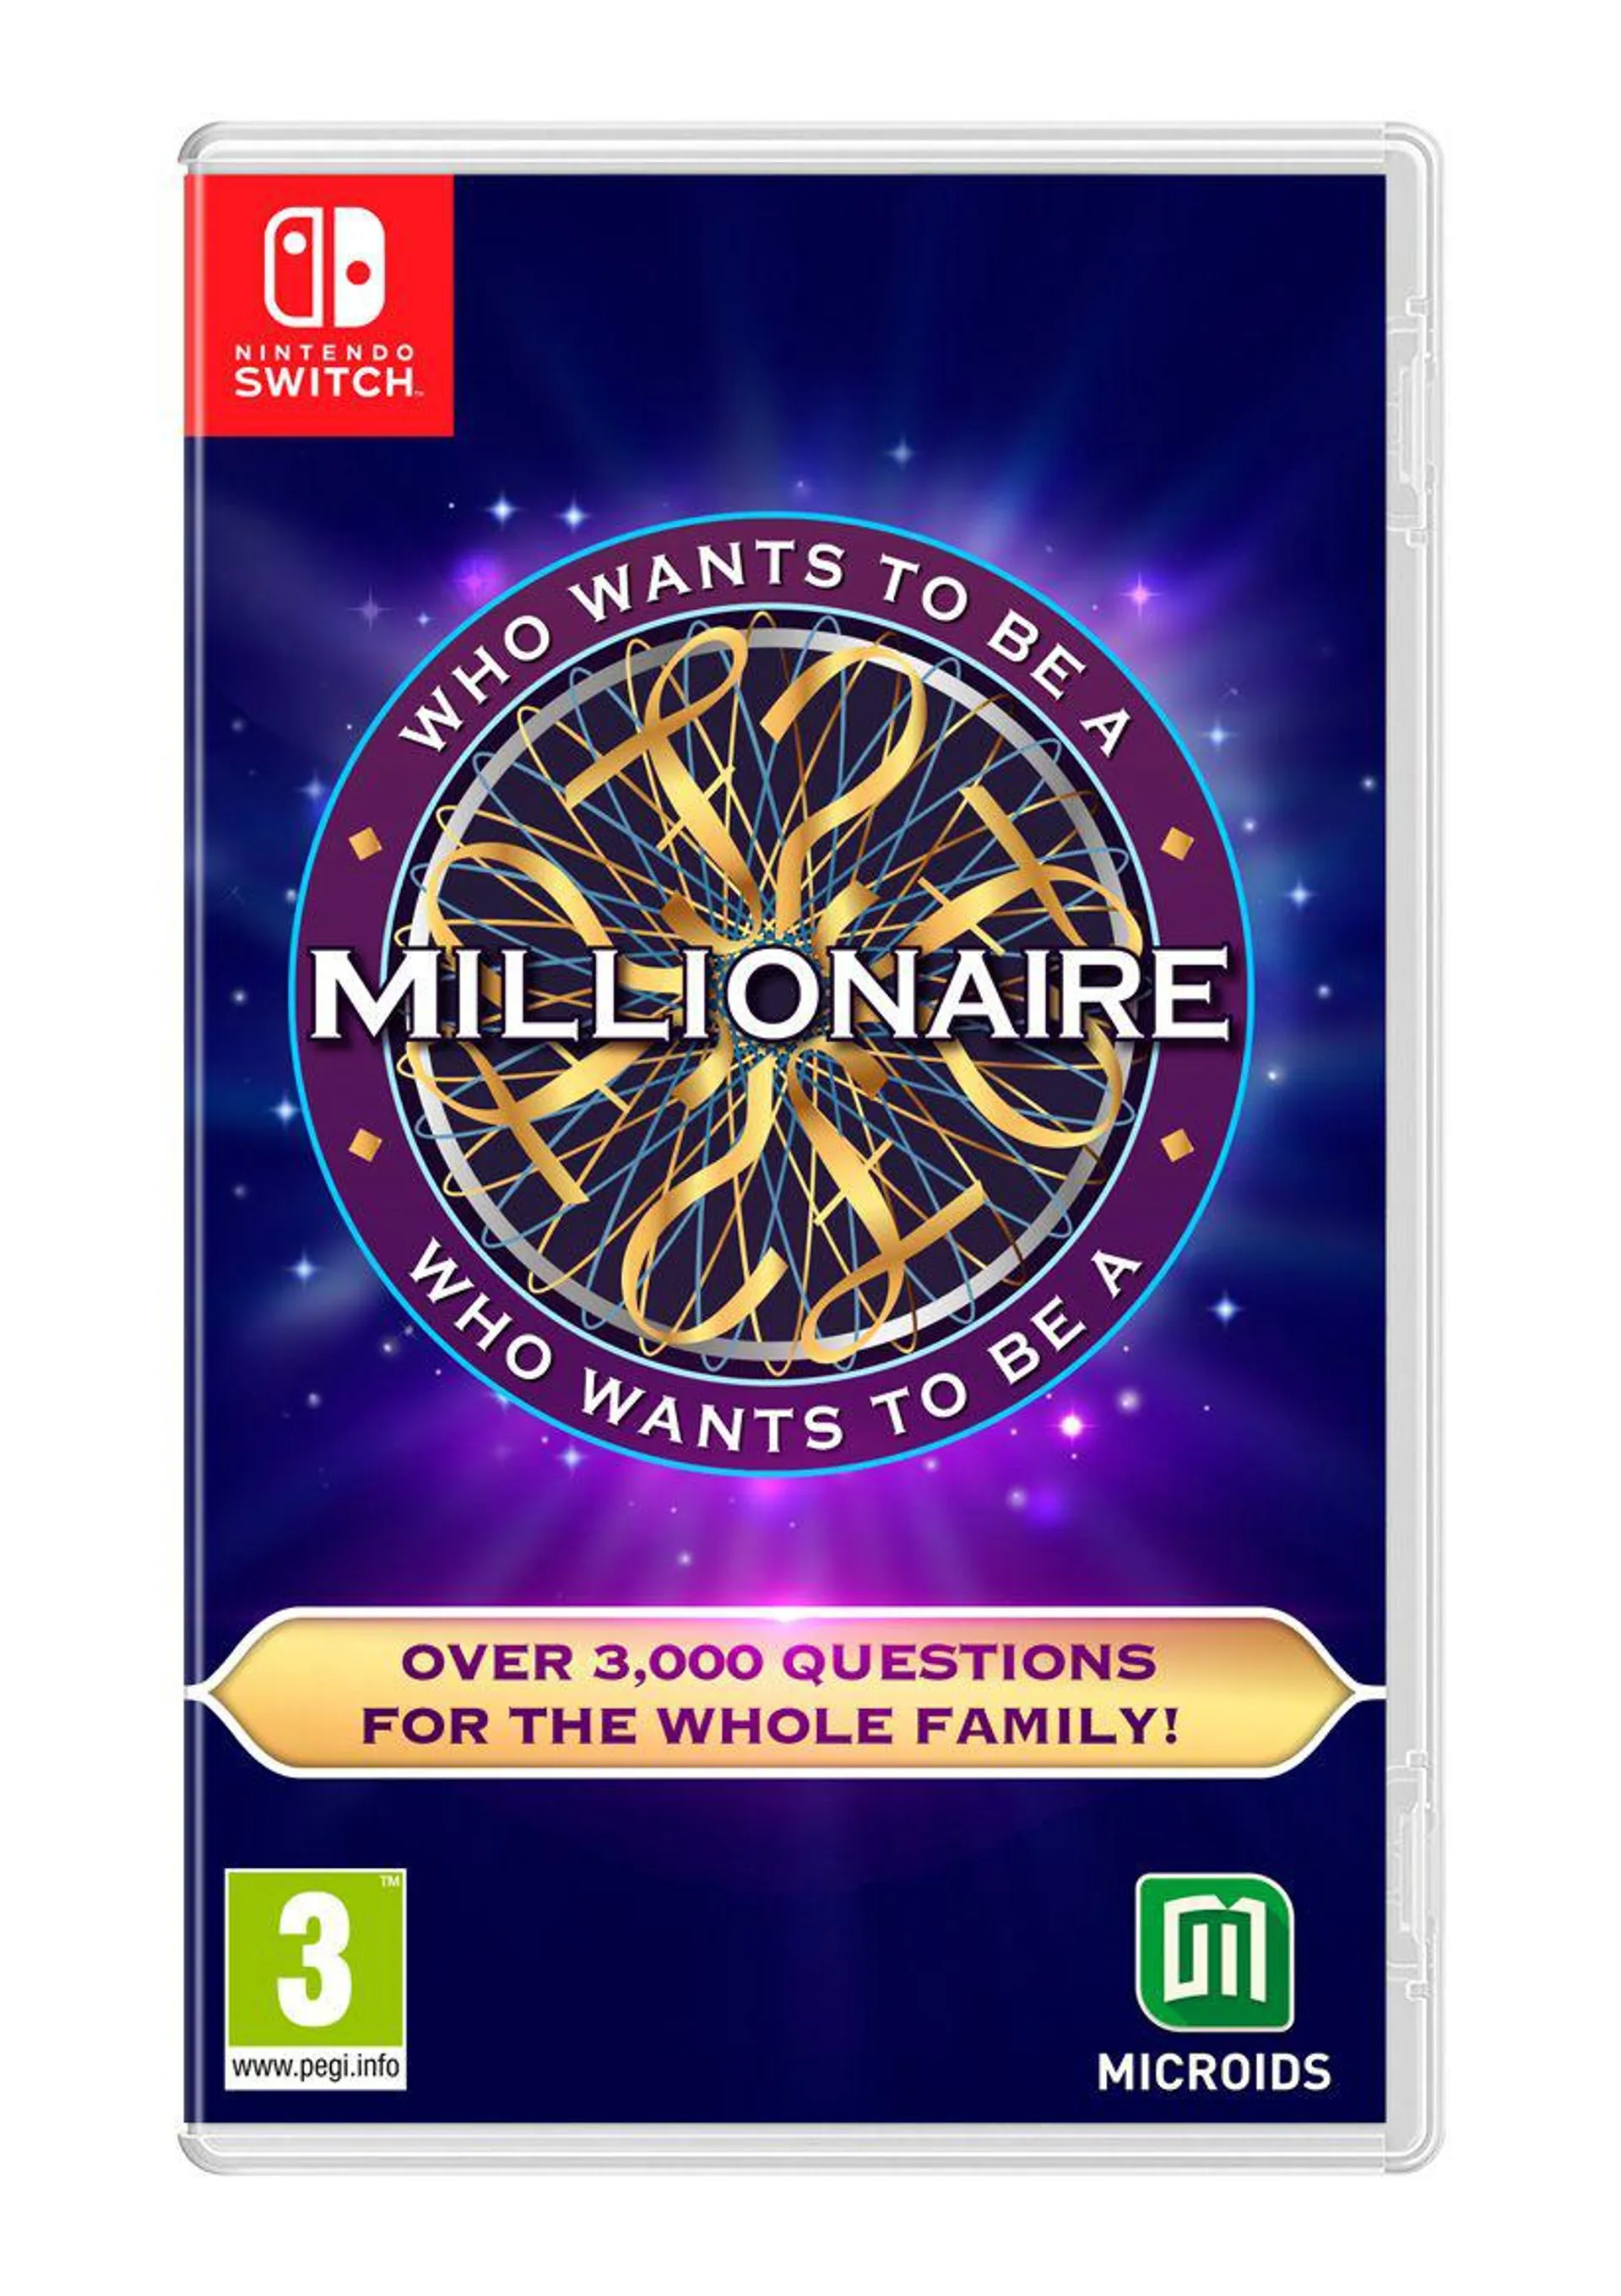 Who Wants To Be A Millionaire on Nintendo Switch